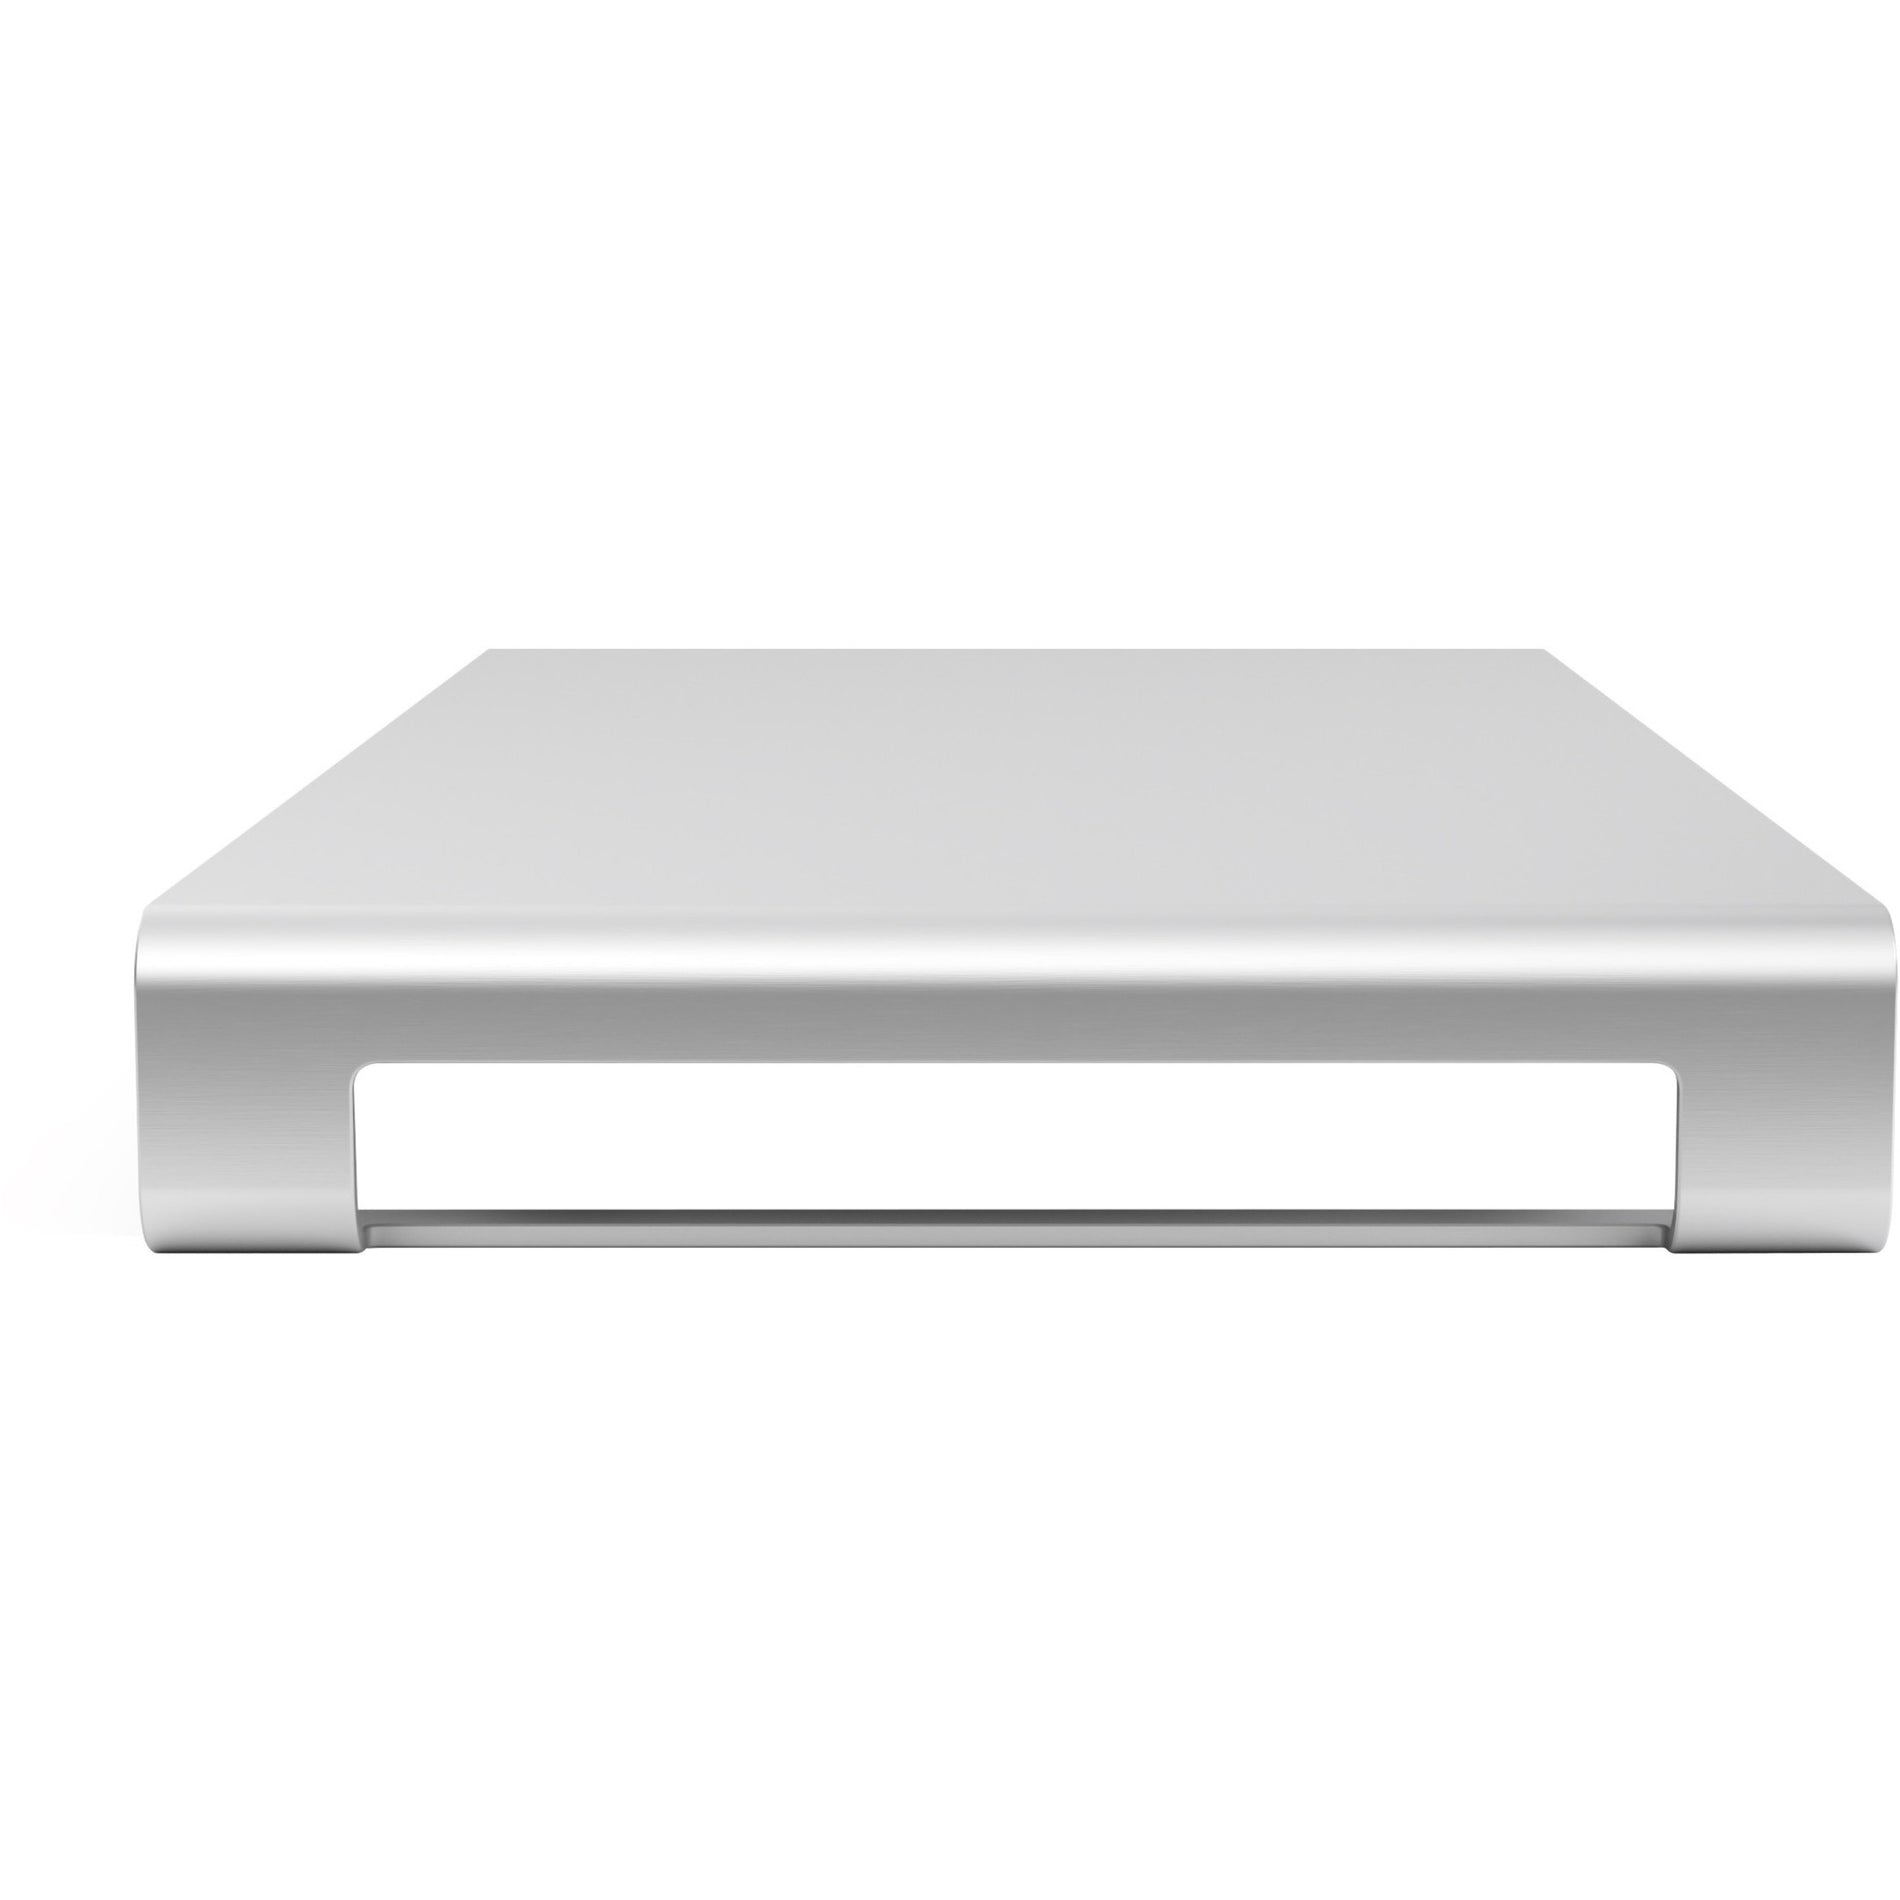 Satechi ST-ASMSS Aluminum Monitor Stand, Silver - Elevate Your Workspace with Style and Functionality